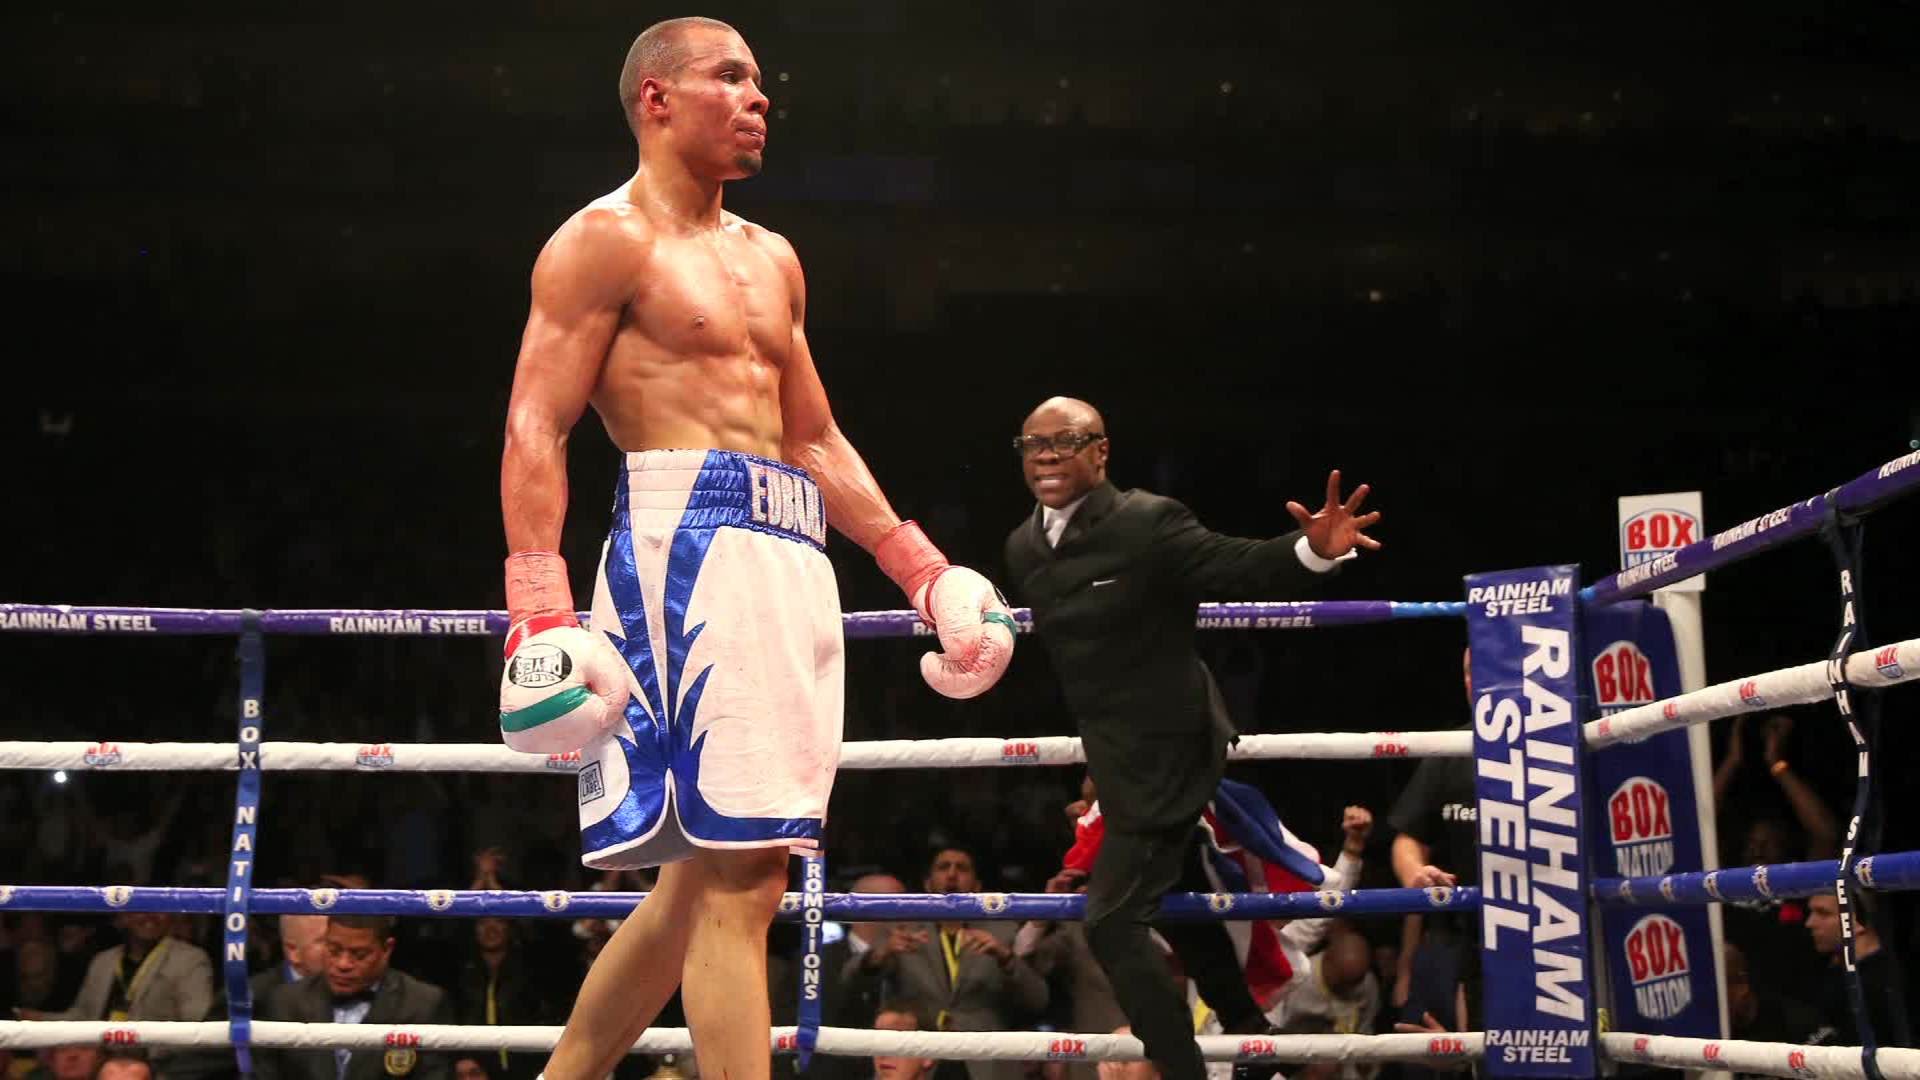 Chris Eubank Jnr: Becoming a man in Vegas, the truth about 'adoption' – and  my relationship with dad